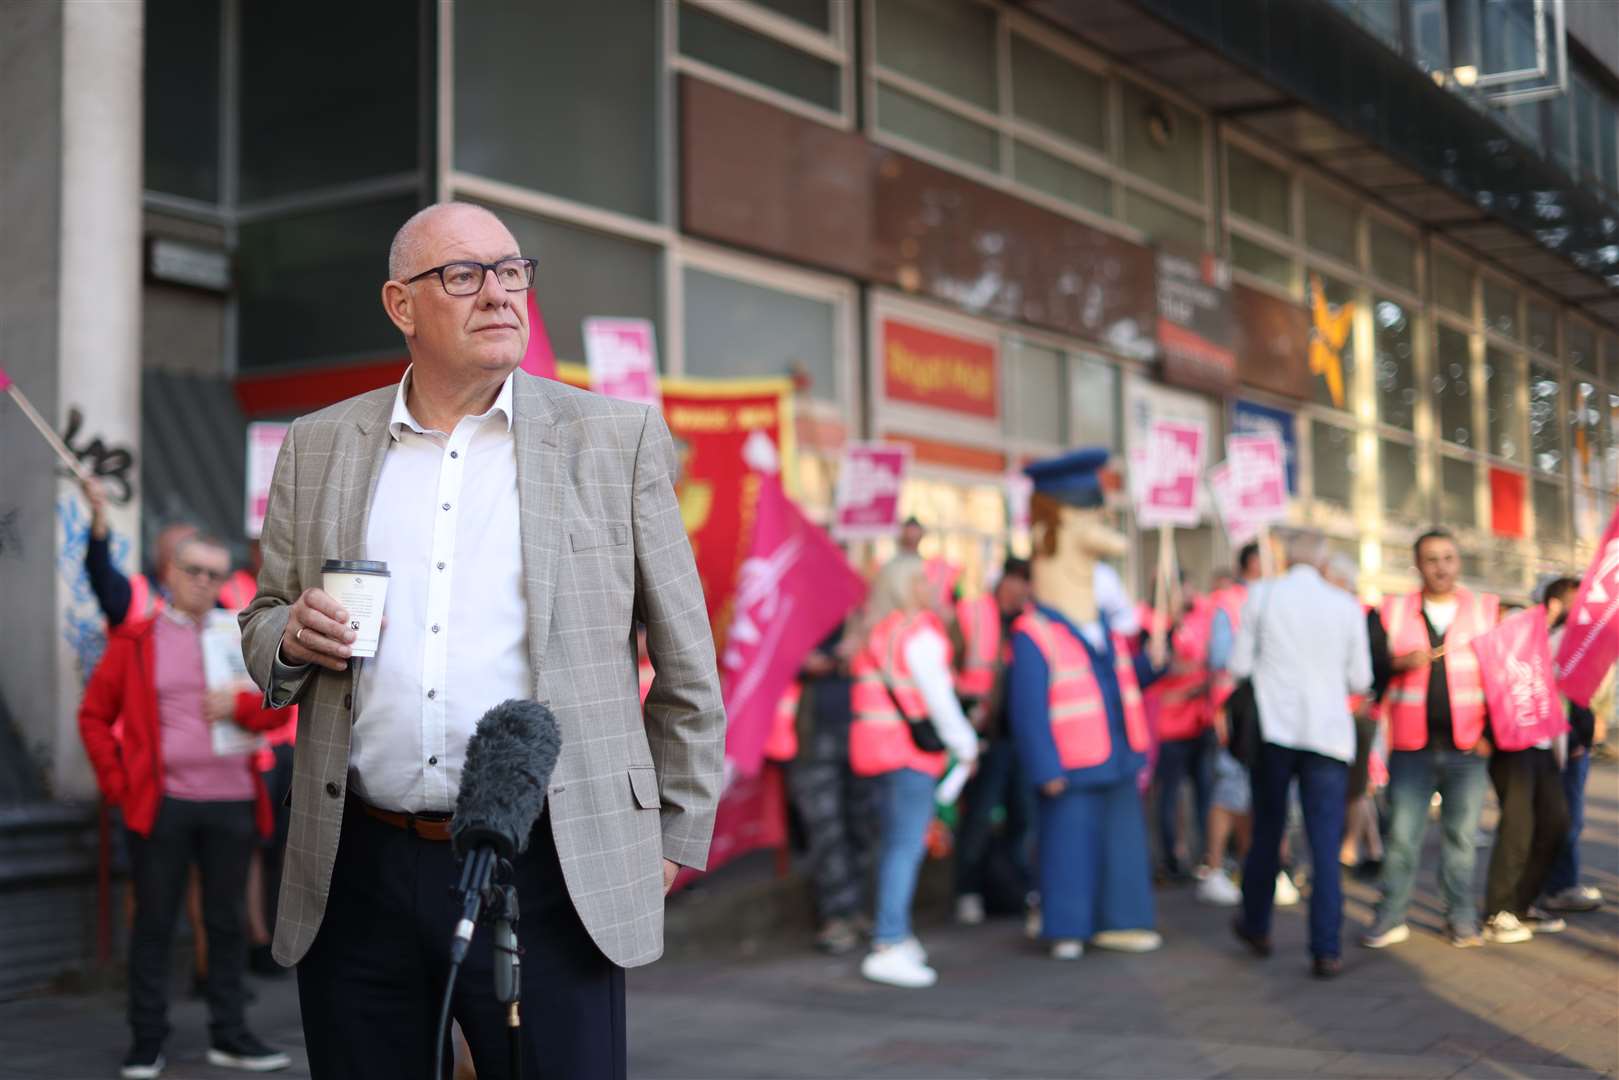 Communication Workers Union (CWU) general secretary Dave Ward speaking to the media as he joins postal workers on the picket line at the Royal Mail Whitechapel Delivery Office in east London (James Manning/PA)